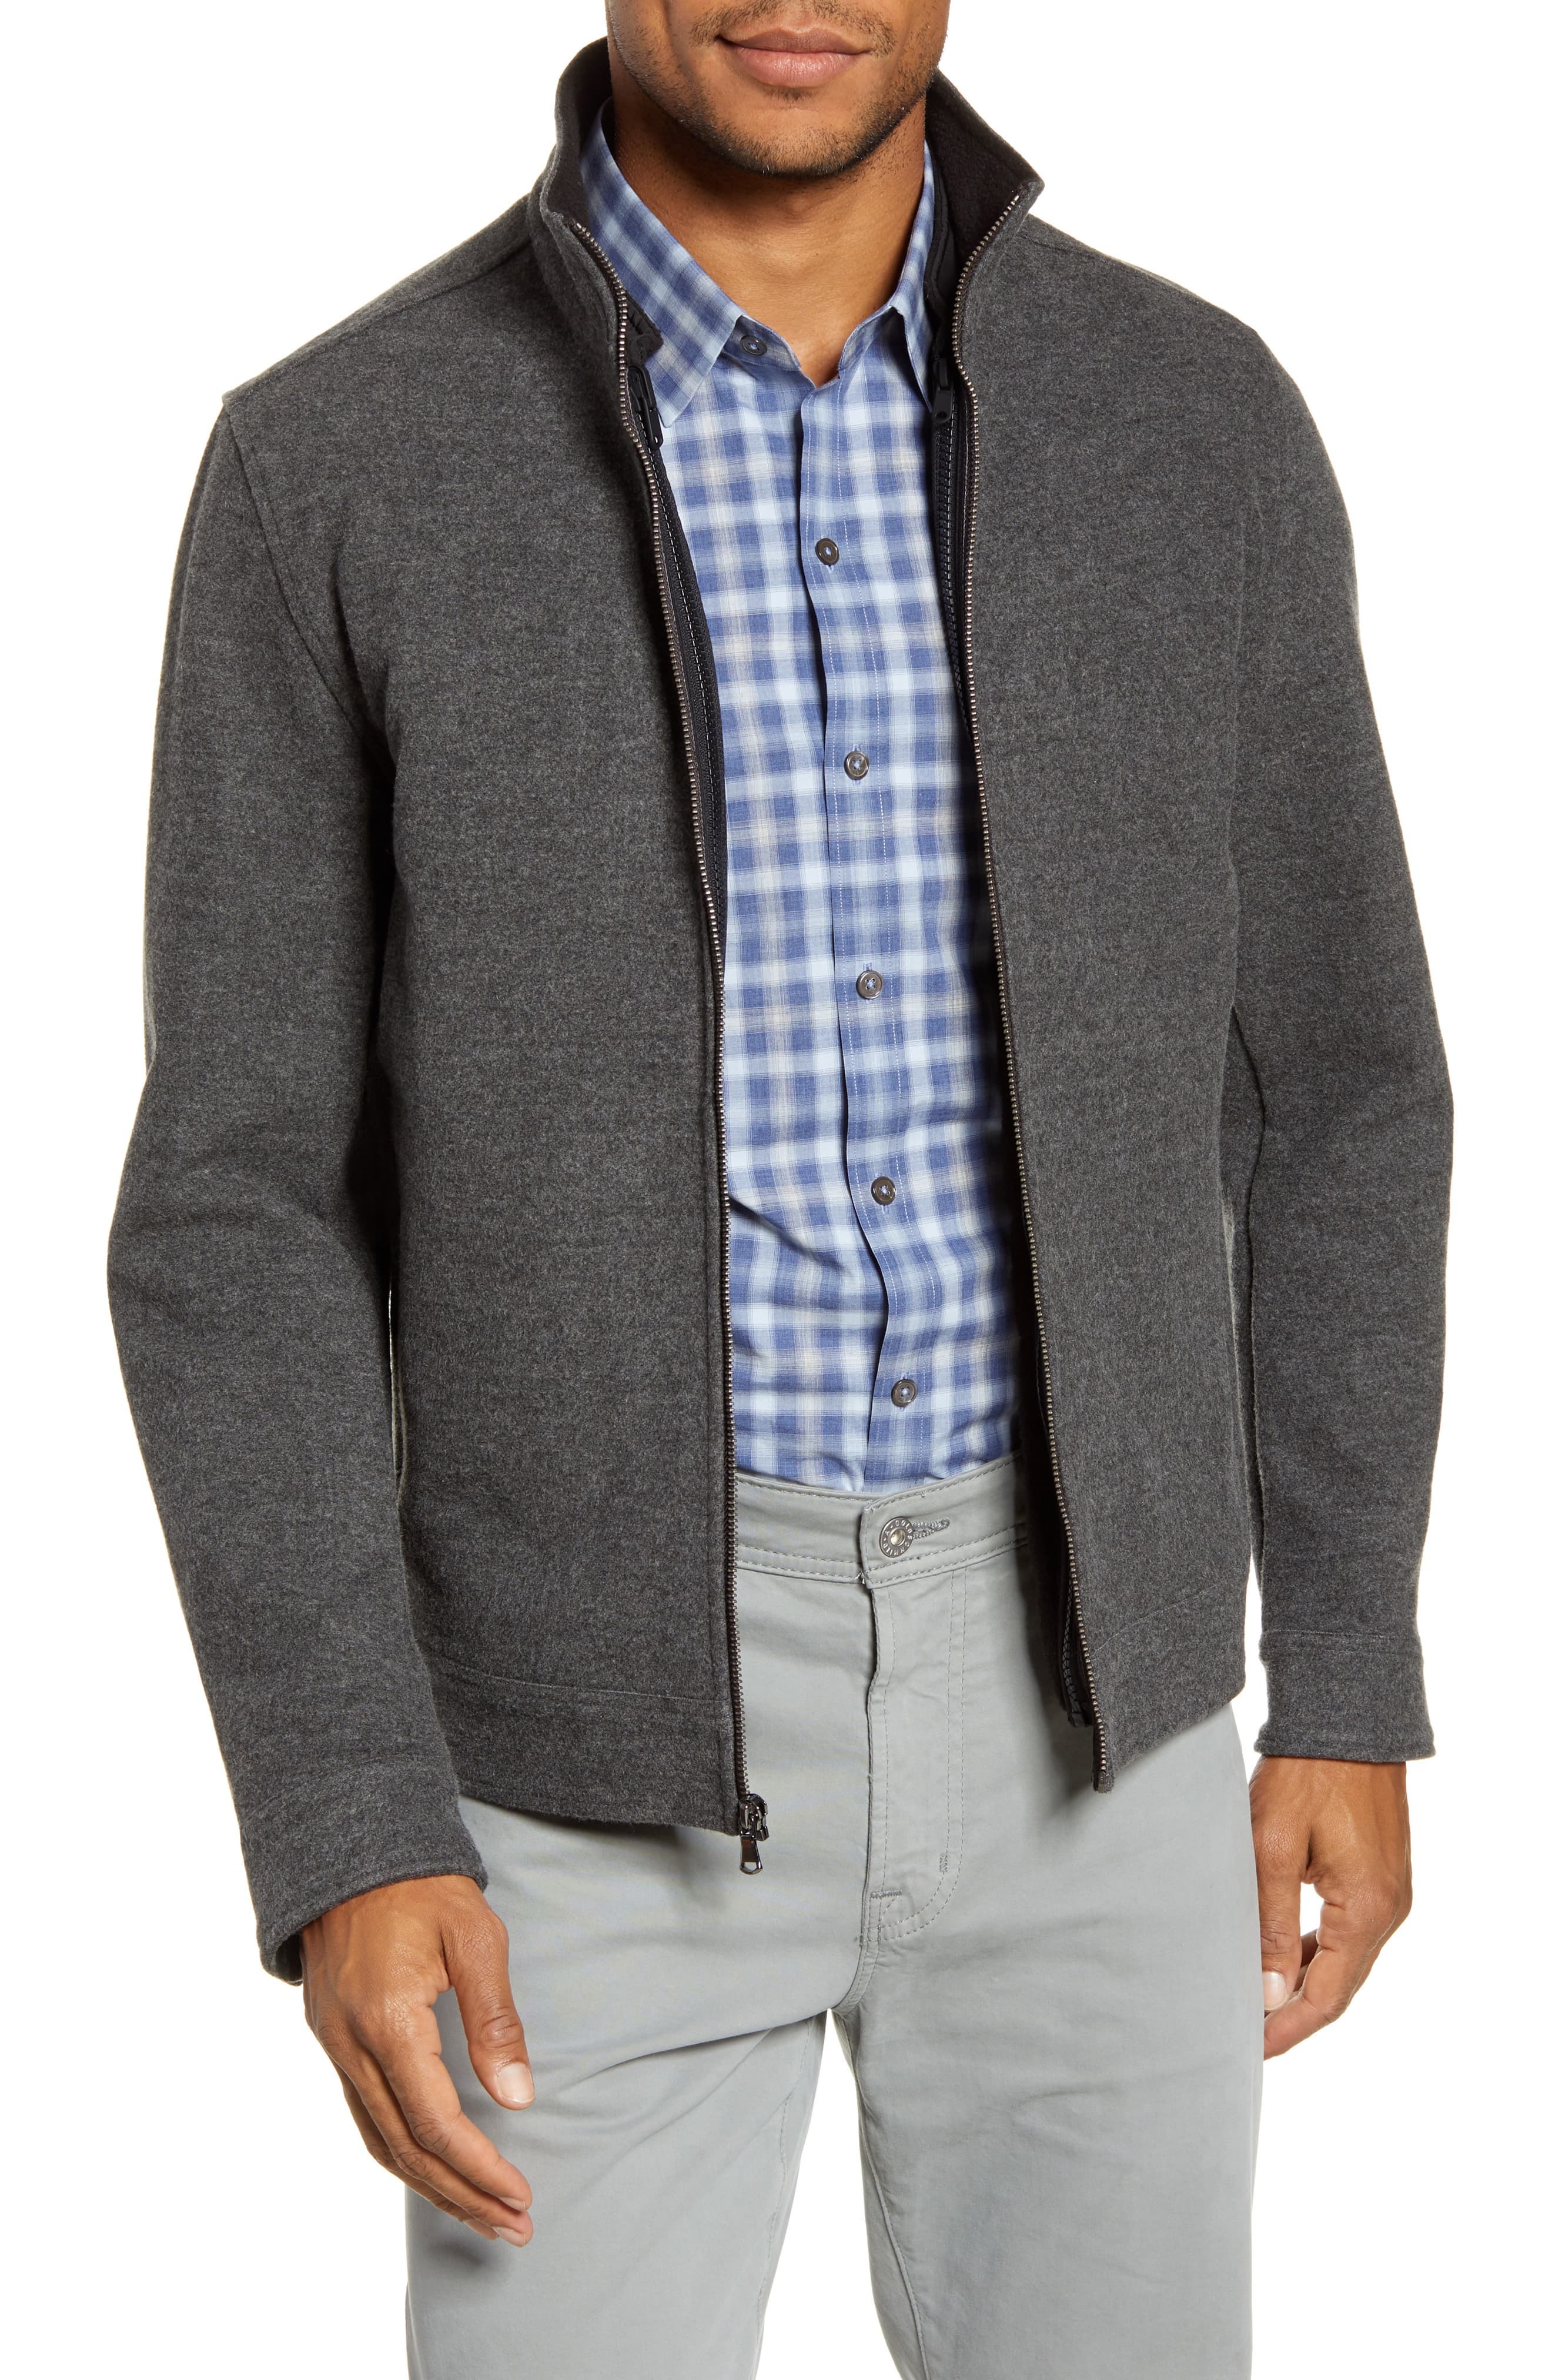 Zachary Prell 3 In 1 Convertible Jacket, $173 | Nordstrom | Lookastic